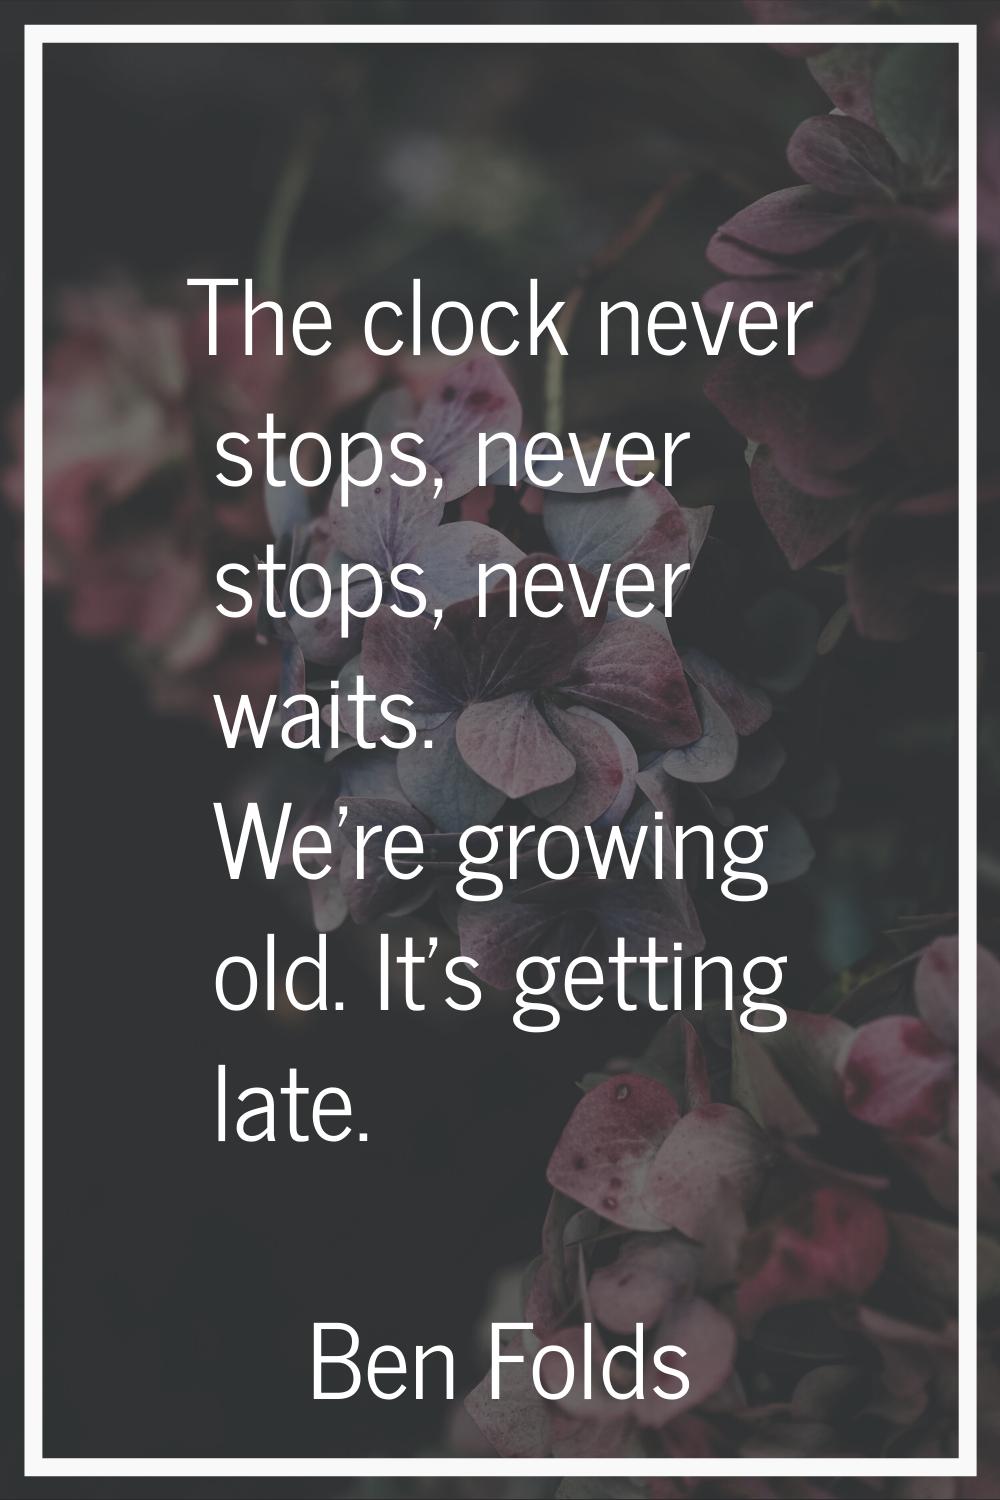 The clock never stops, never stops, never waits. We're growing old. It's getting late.